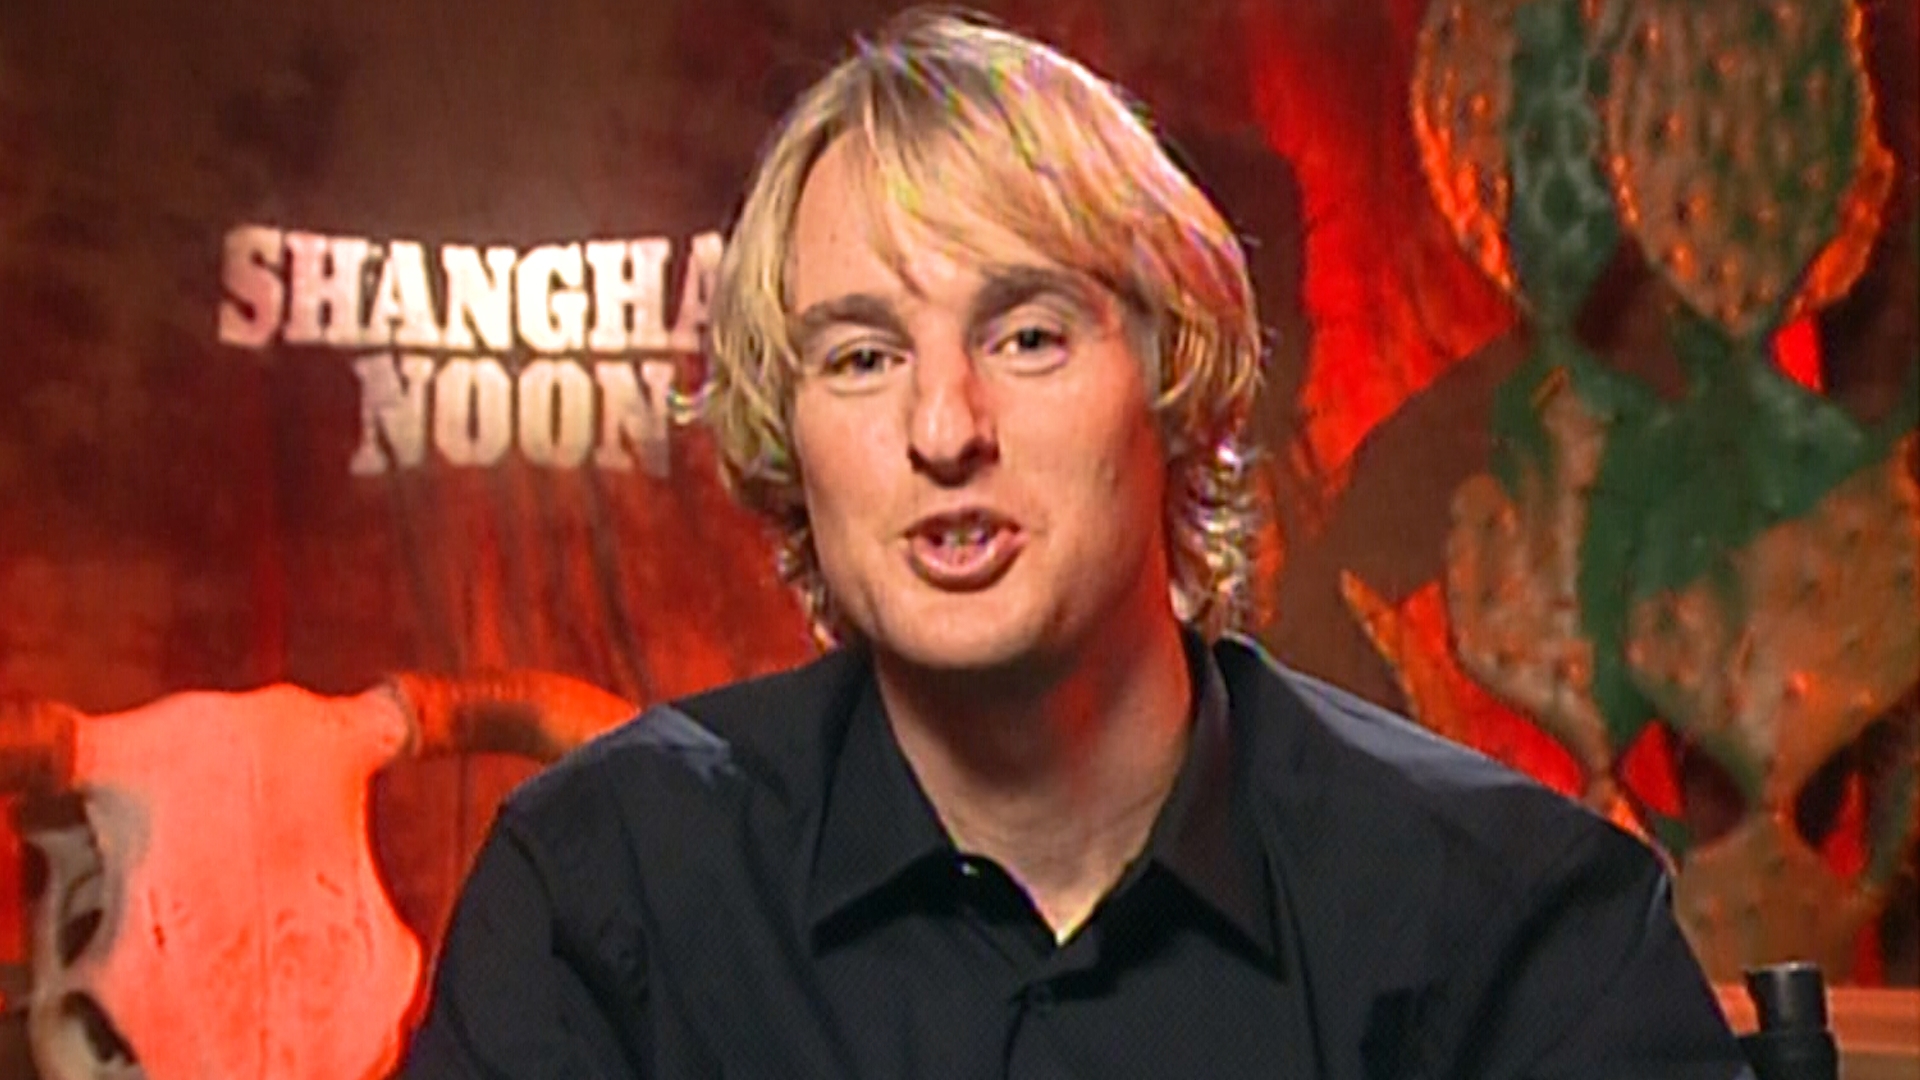 Owen Wilson sat down with WFAA to talk about taking on the role of Roy O'Bannon in the 2000 film Shanghai Noon.